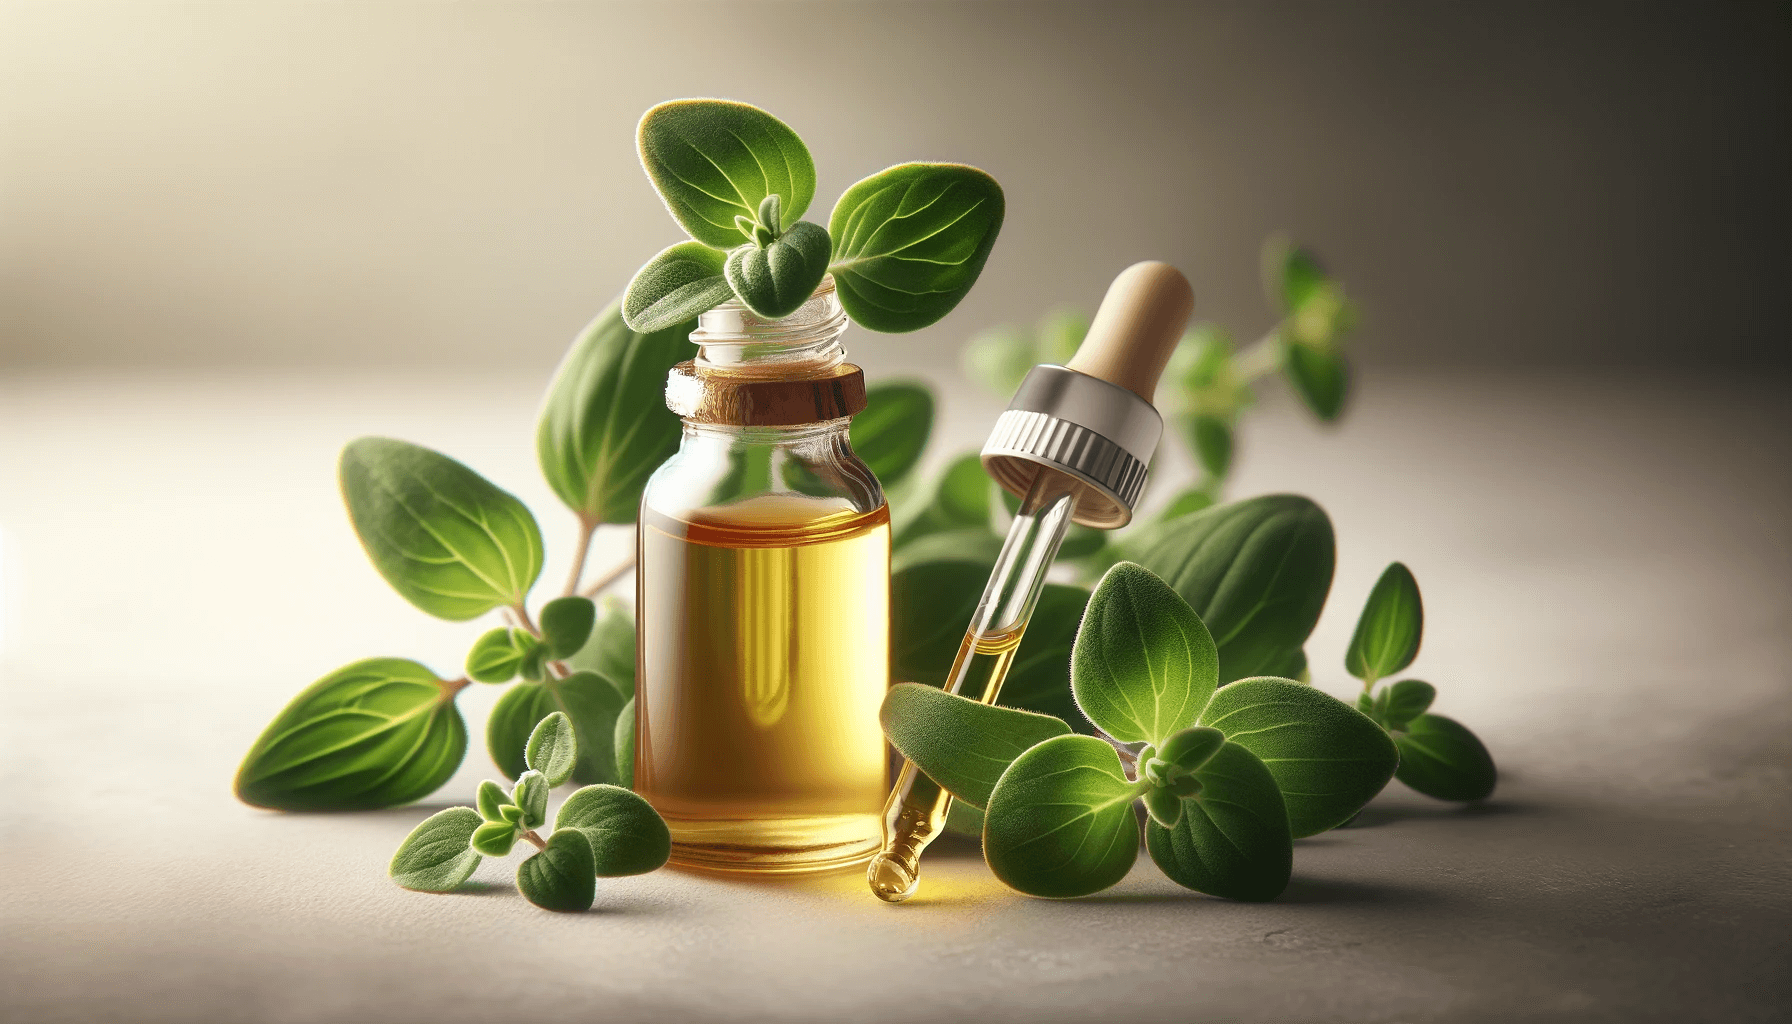 Small bottle of oregano oil with a dropper surrounded by fresh oregano leaves. The bottle is clear, allowing the golden hue of the oil to show.